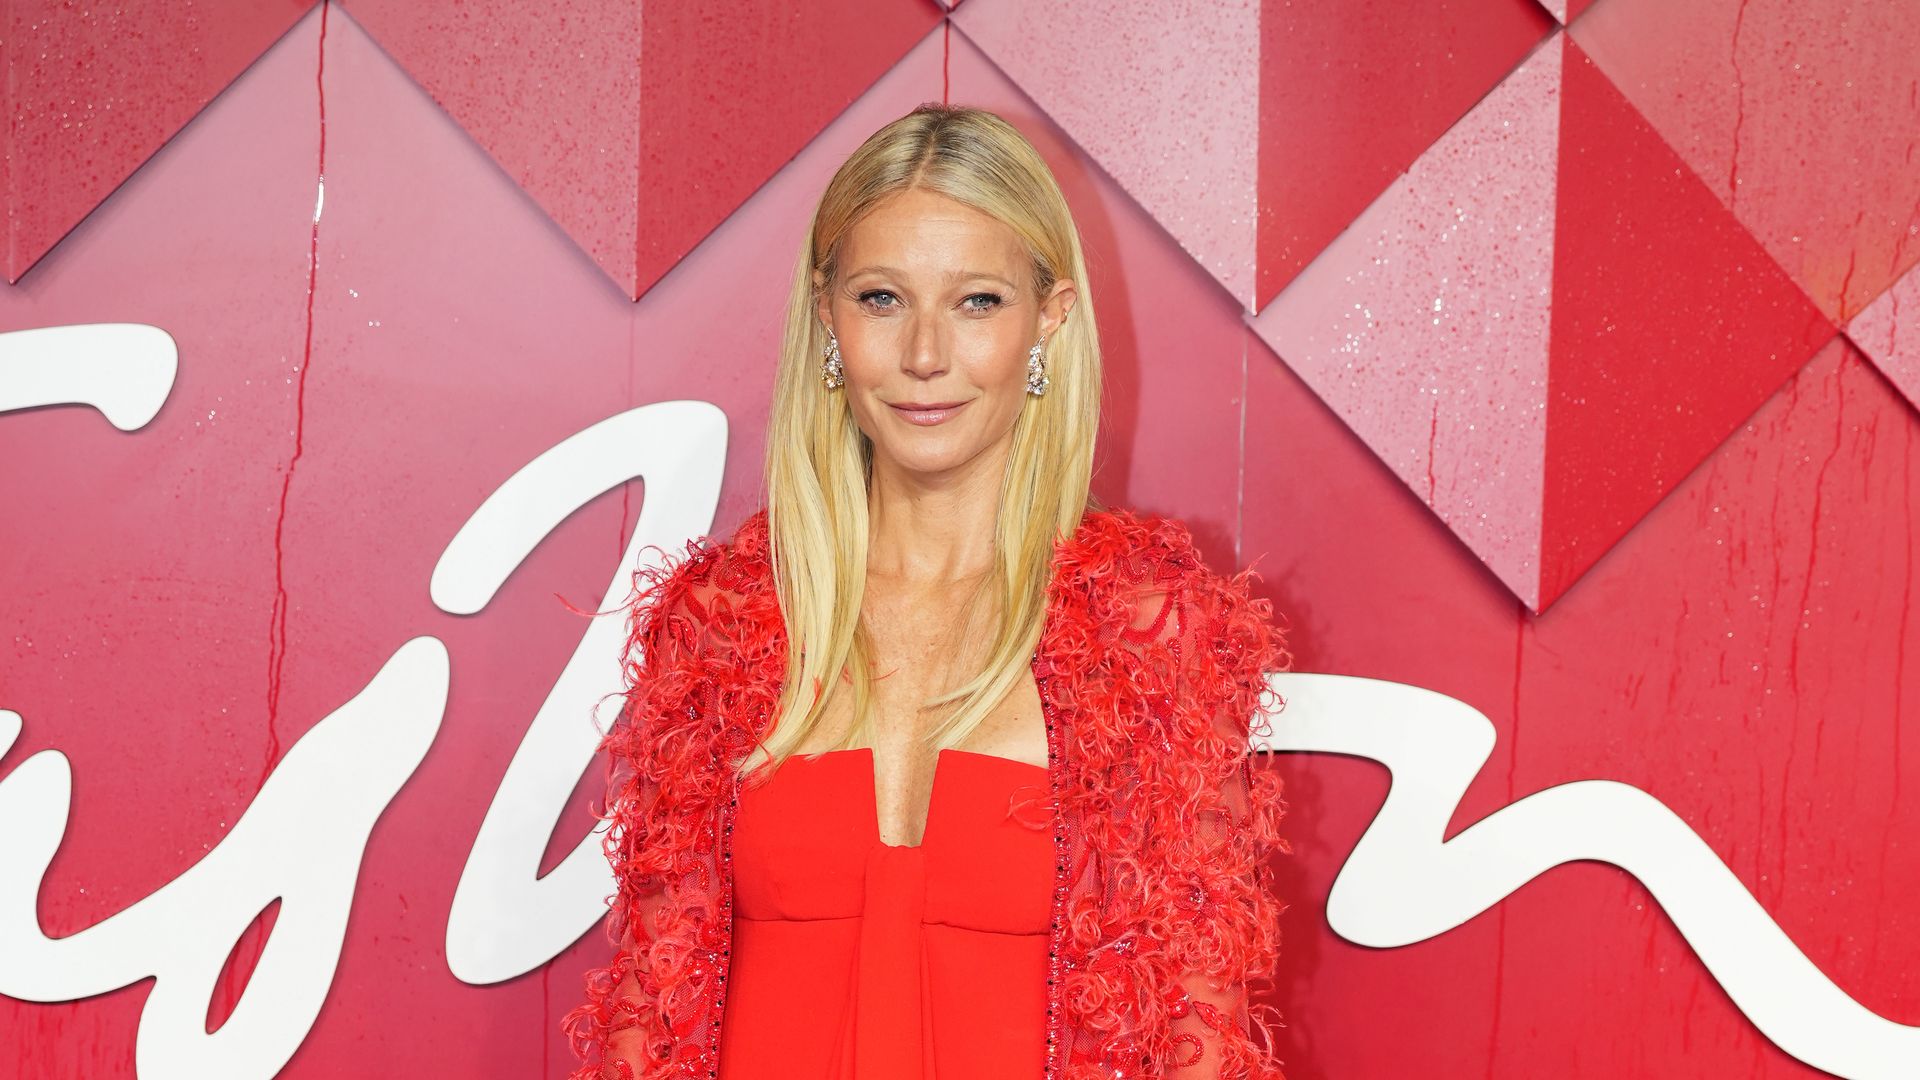 LONDON, ENGLAND - DECEMBER 04: Gwyneth Paltrow attends The Fashion Awards 2023 presented by Pandora at the Royal Albert Hall on December 04, 2023 in London, England. (Photo by Dominic Lipinski/Getty Images)